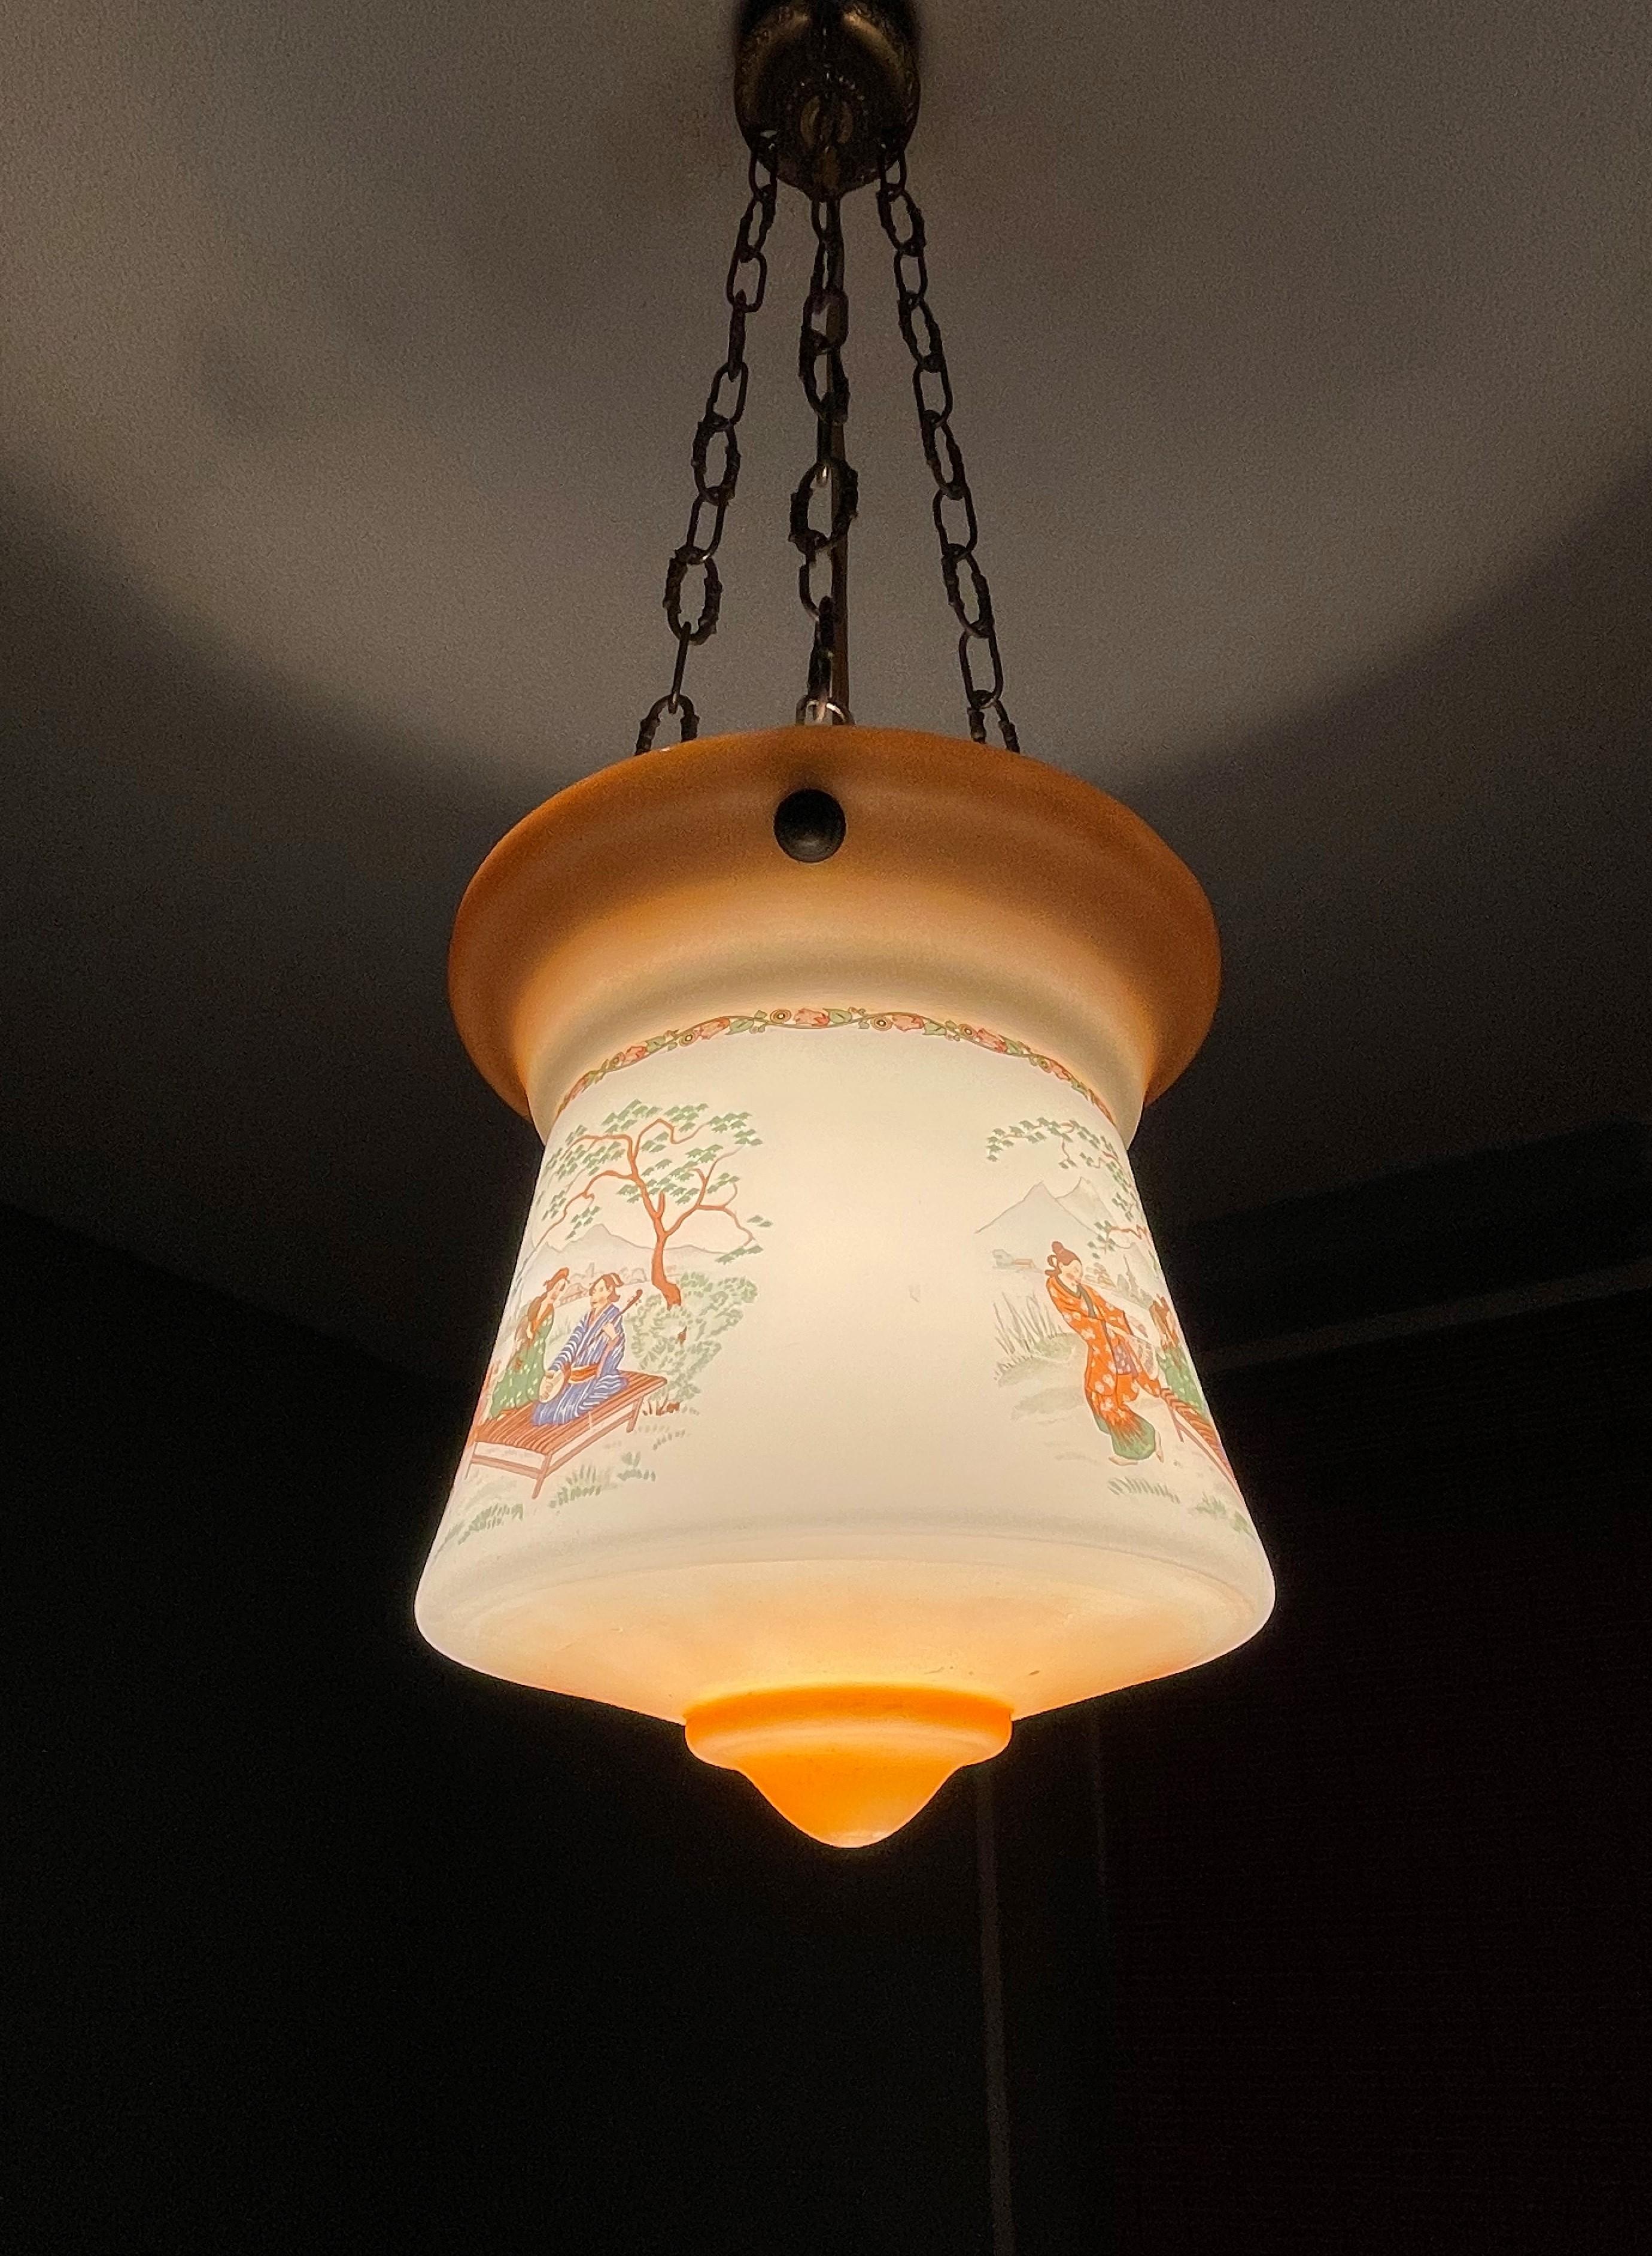 Painted Art Deco Japonisme Lantern Pendant W. Mount Fuji and Traditional Music Graphics For Sale